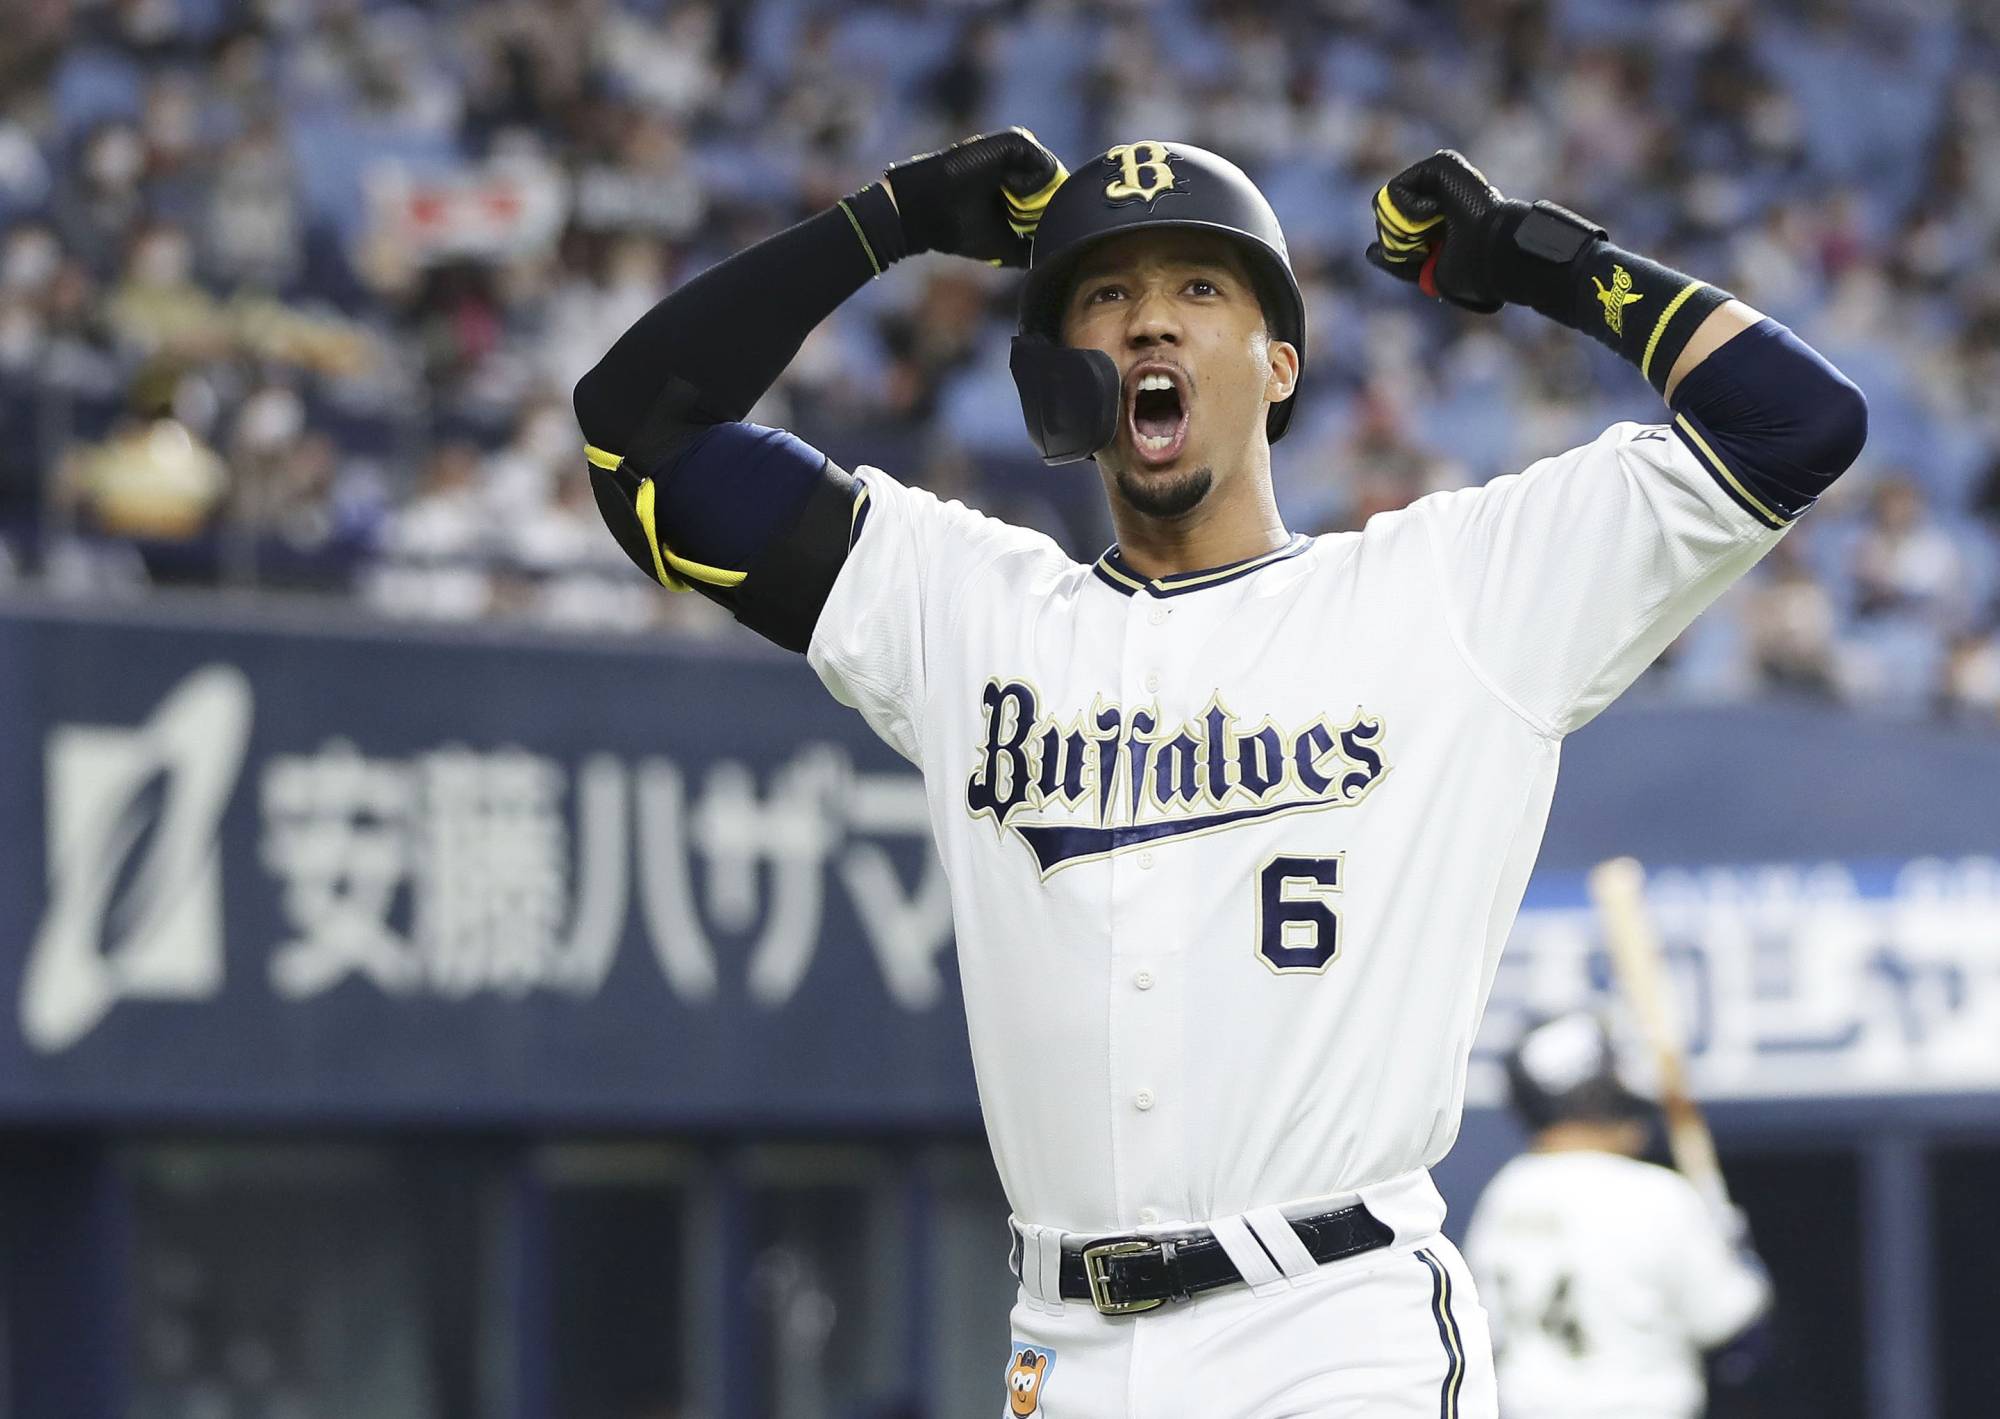 Orix infielder Yuma Mune picks perfect time to find his groove